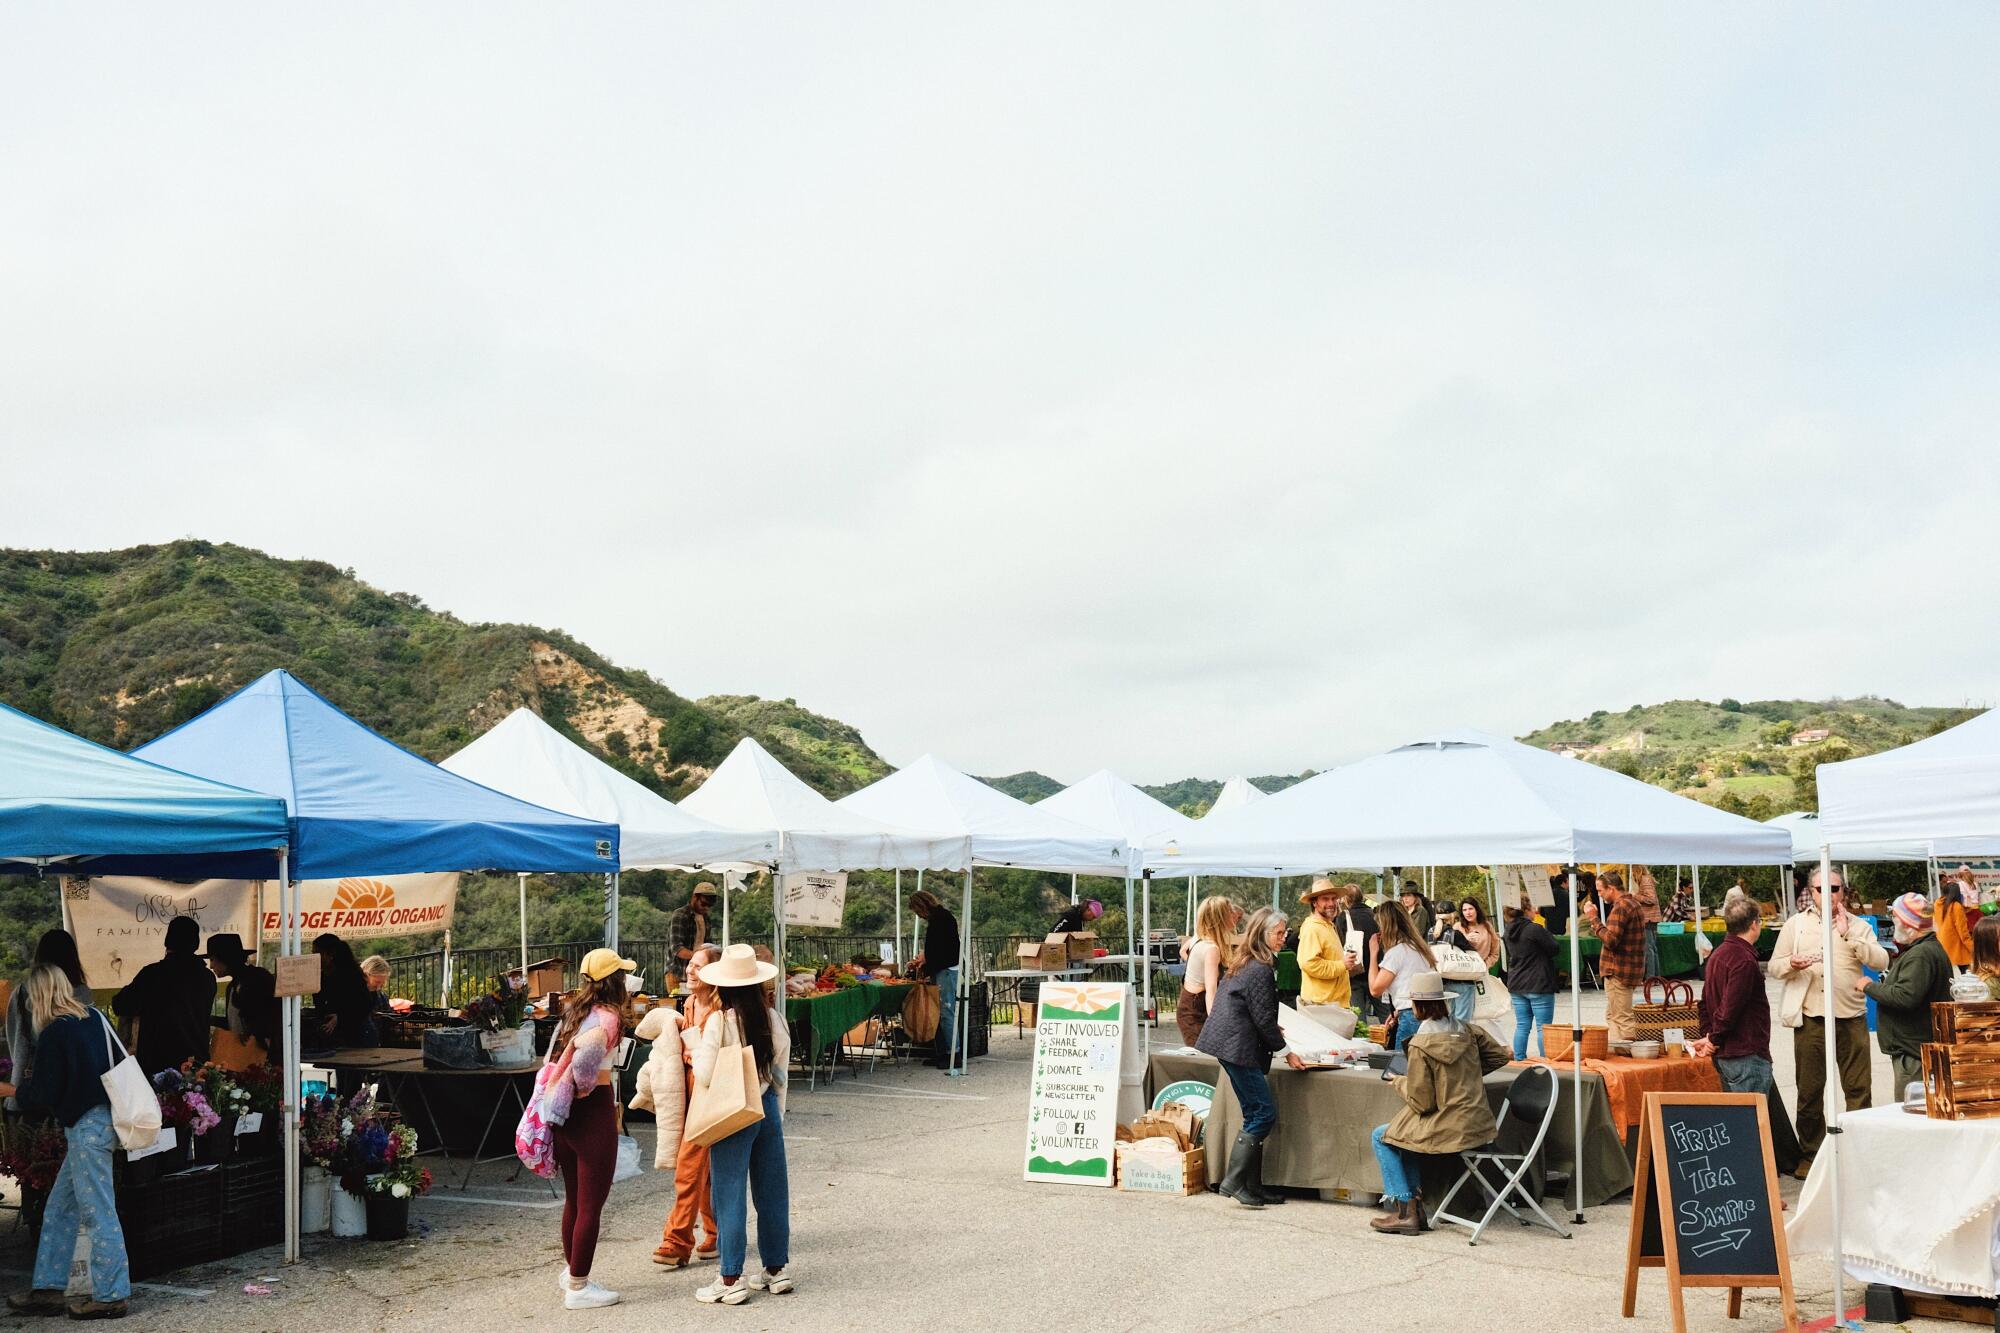 Stalls and shoppers at the Topanga Farmers Market; behind is the greenery of the Santa Monica Mountains